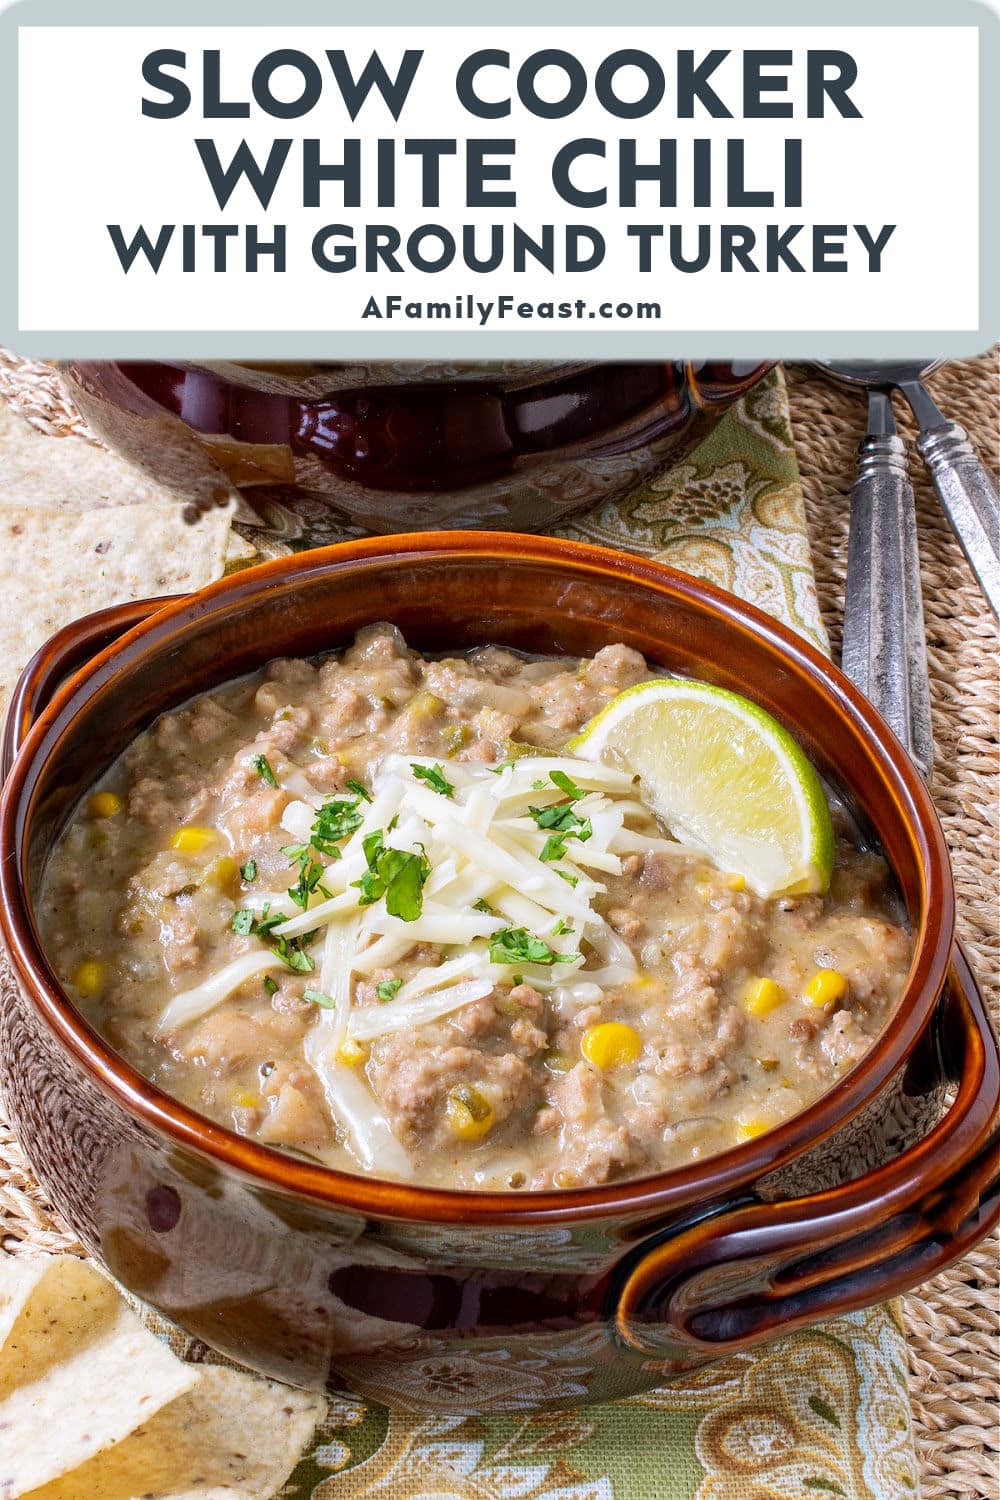 Slow Cooker White Chili with Ground Turkey - A Family Feast